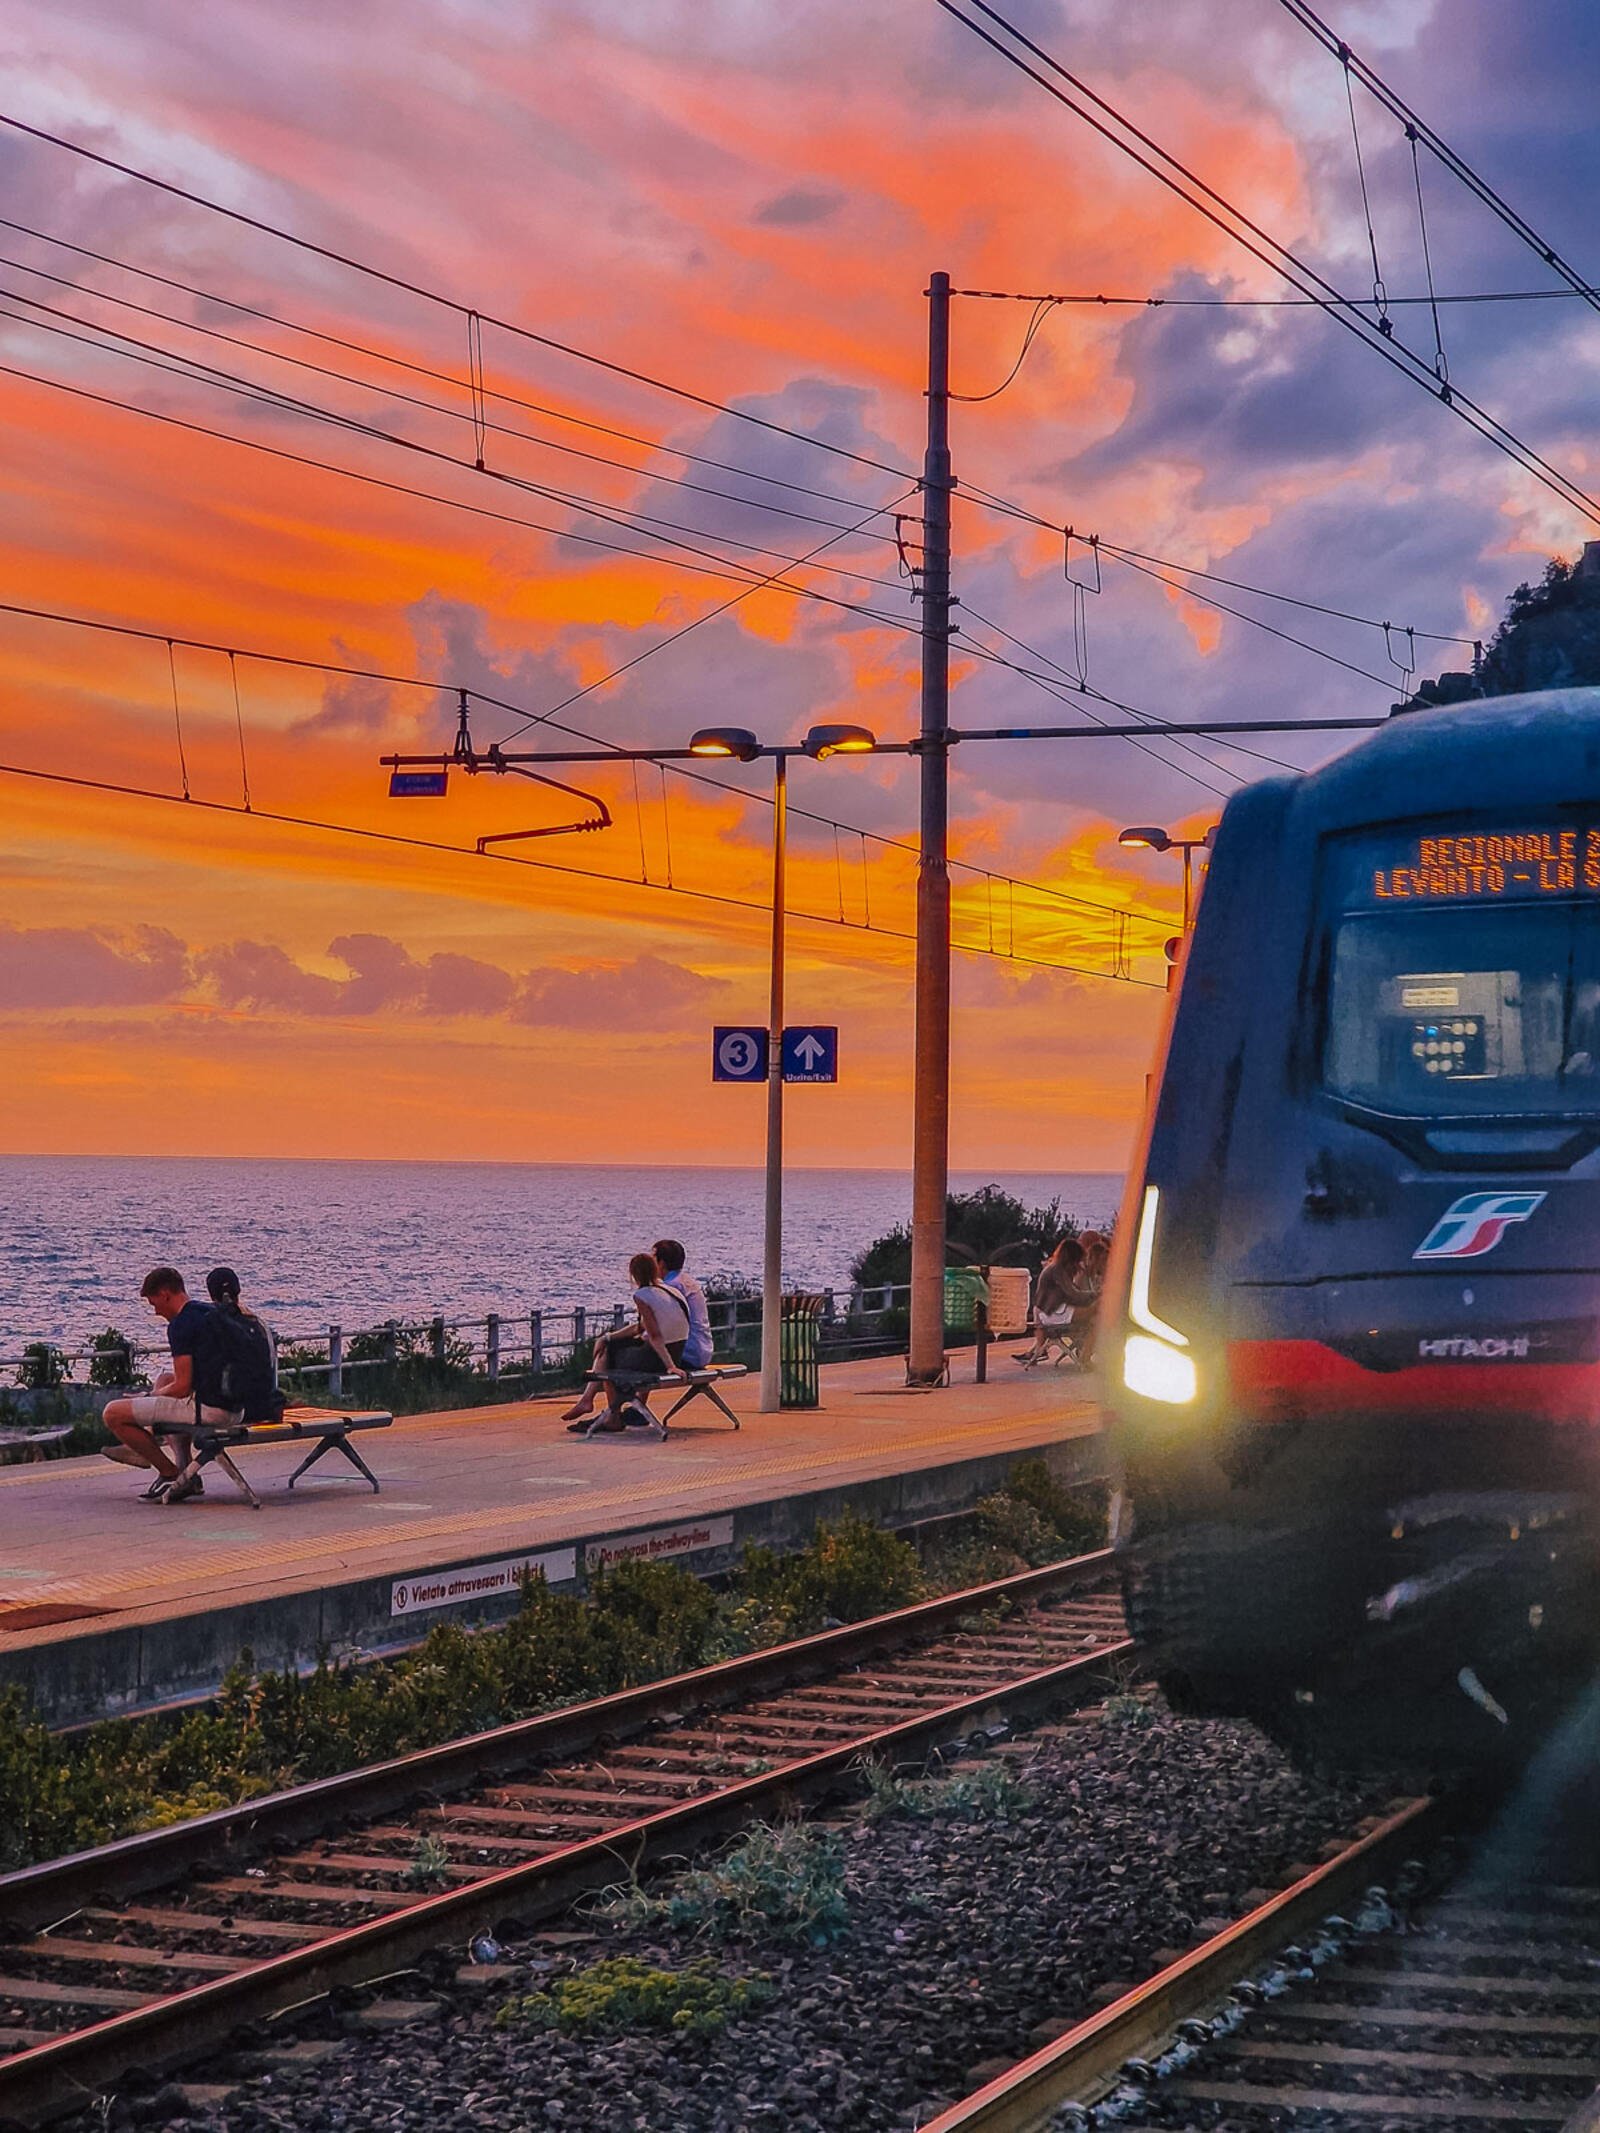 a rain coming into a station by the sea at sunset in italy's cinque terre region